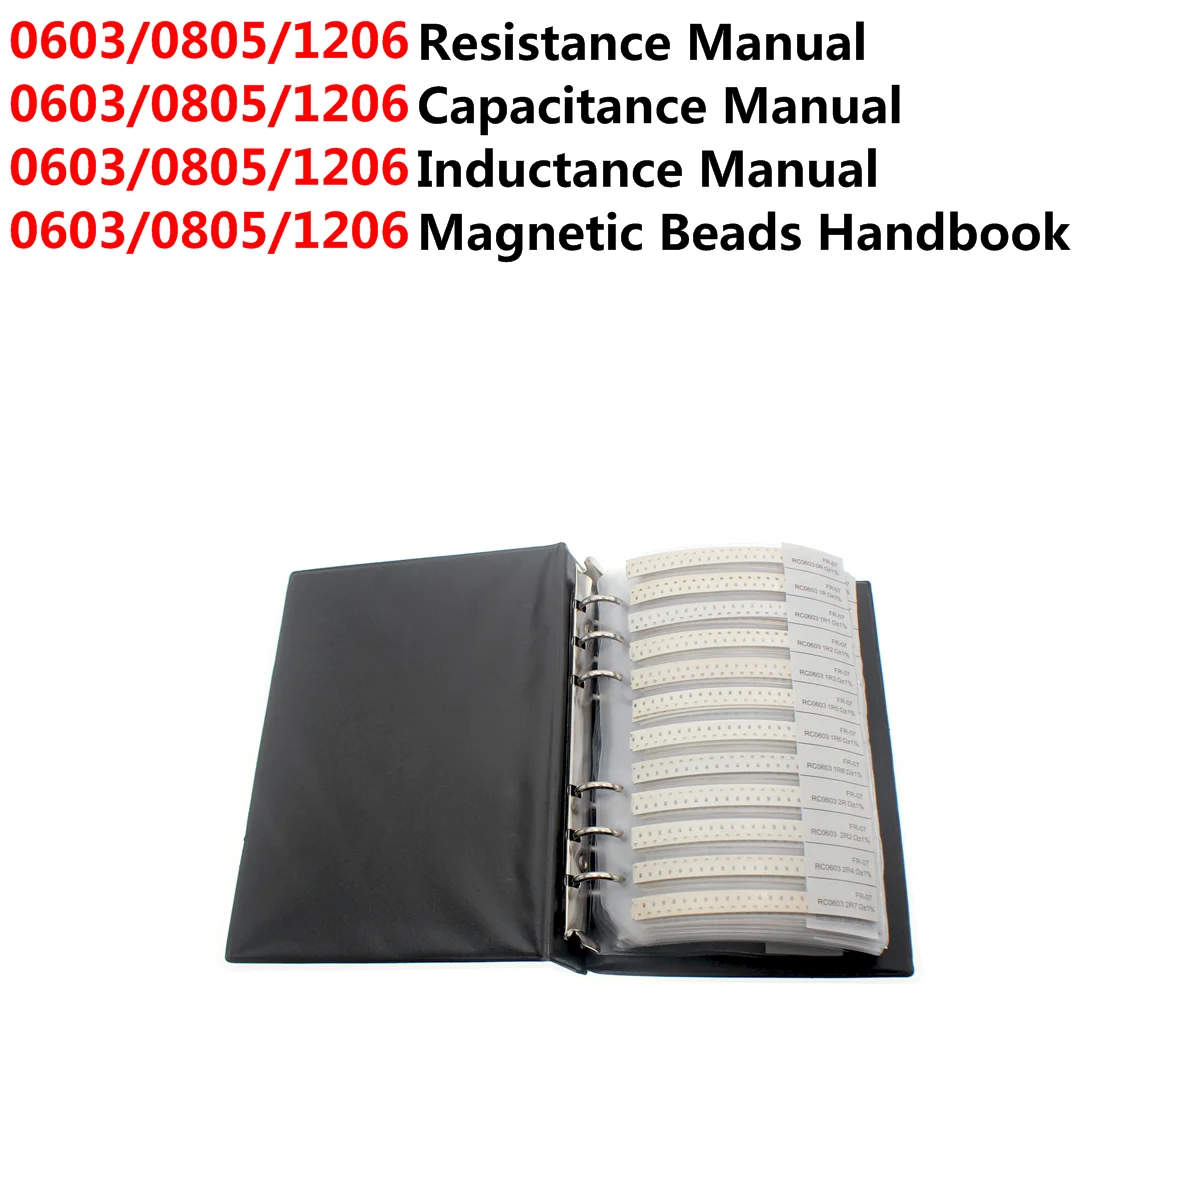 0603 0805 1206 Resistor Capacitor inductance magnetic bead Sample Book ibuw SMD Assorted Kit